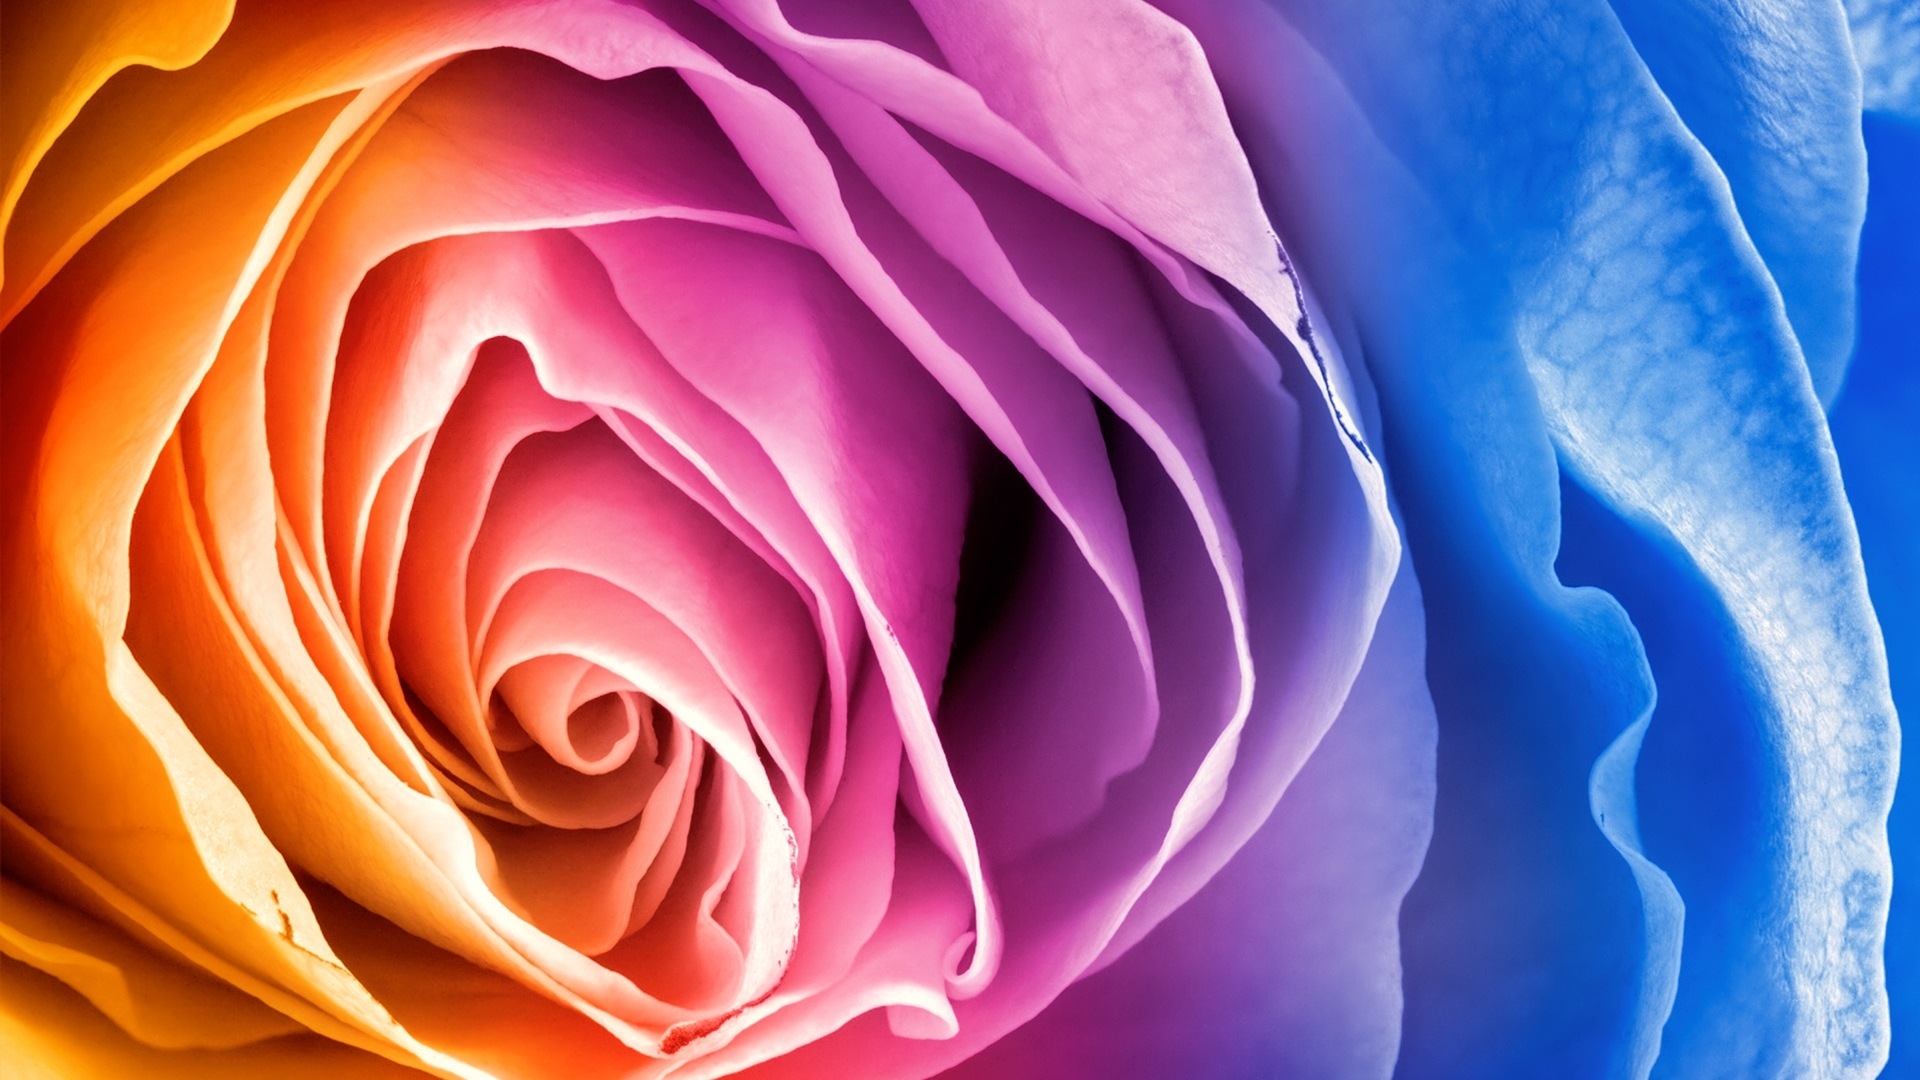 Brilliant colors, beautiful flowers HD wallpapers #3 - 1920x1080